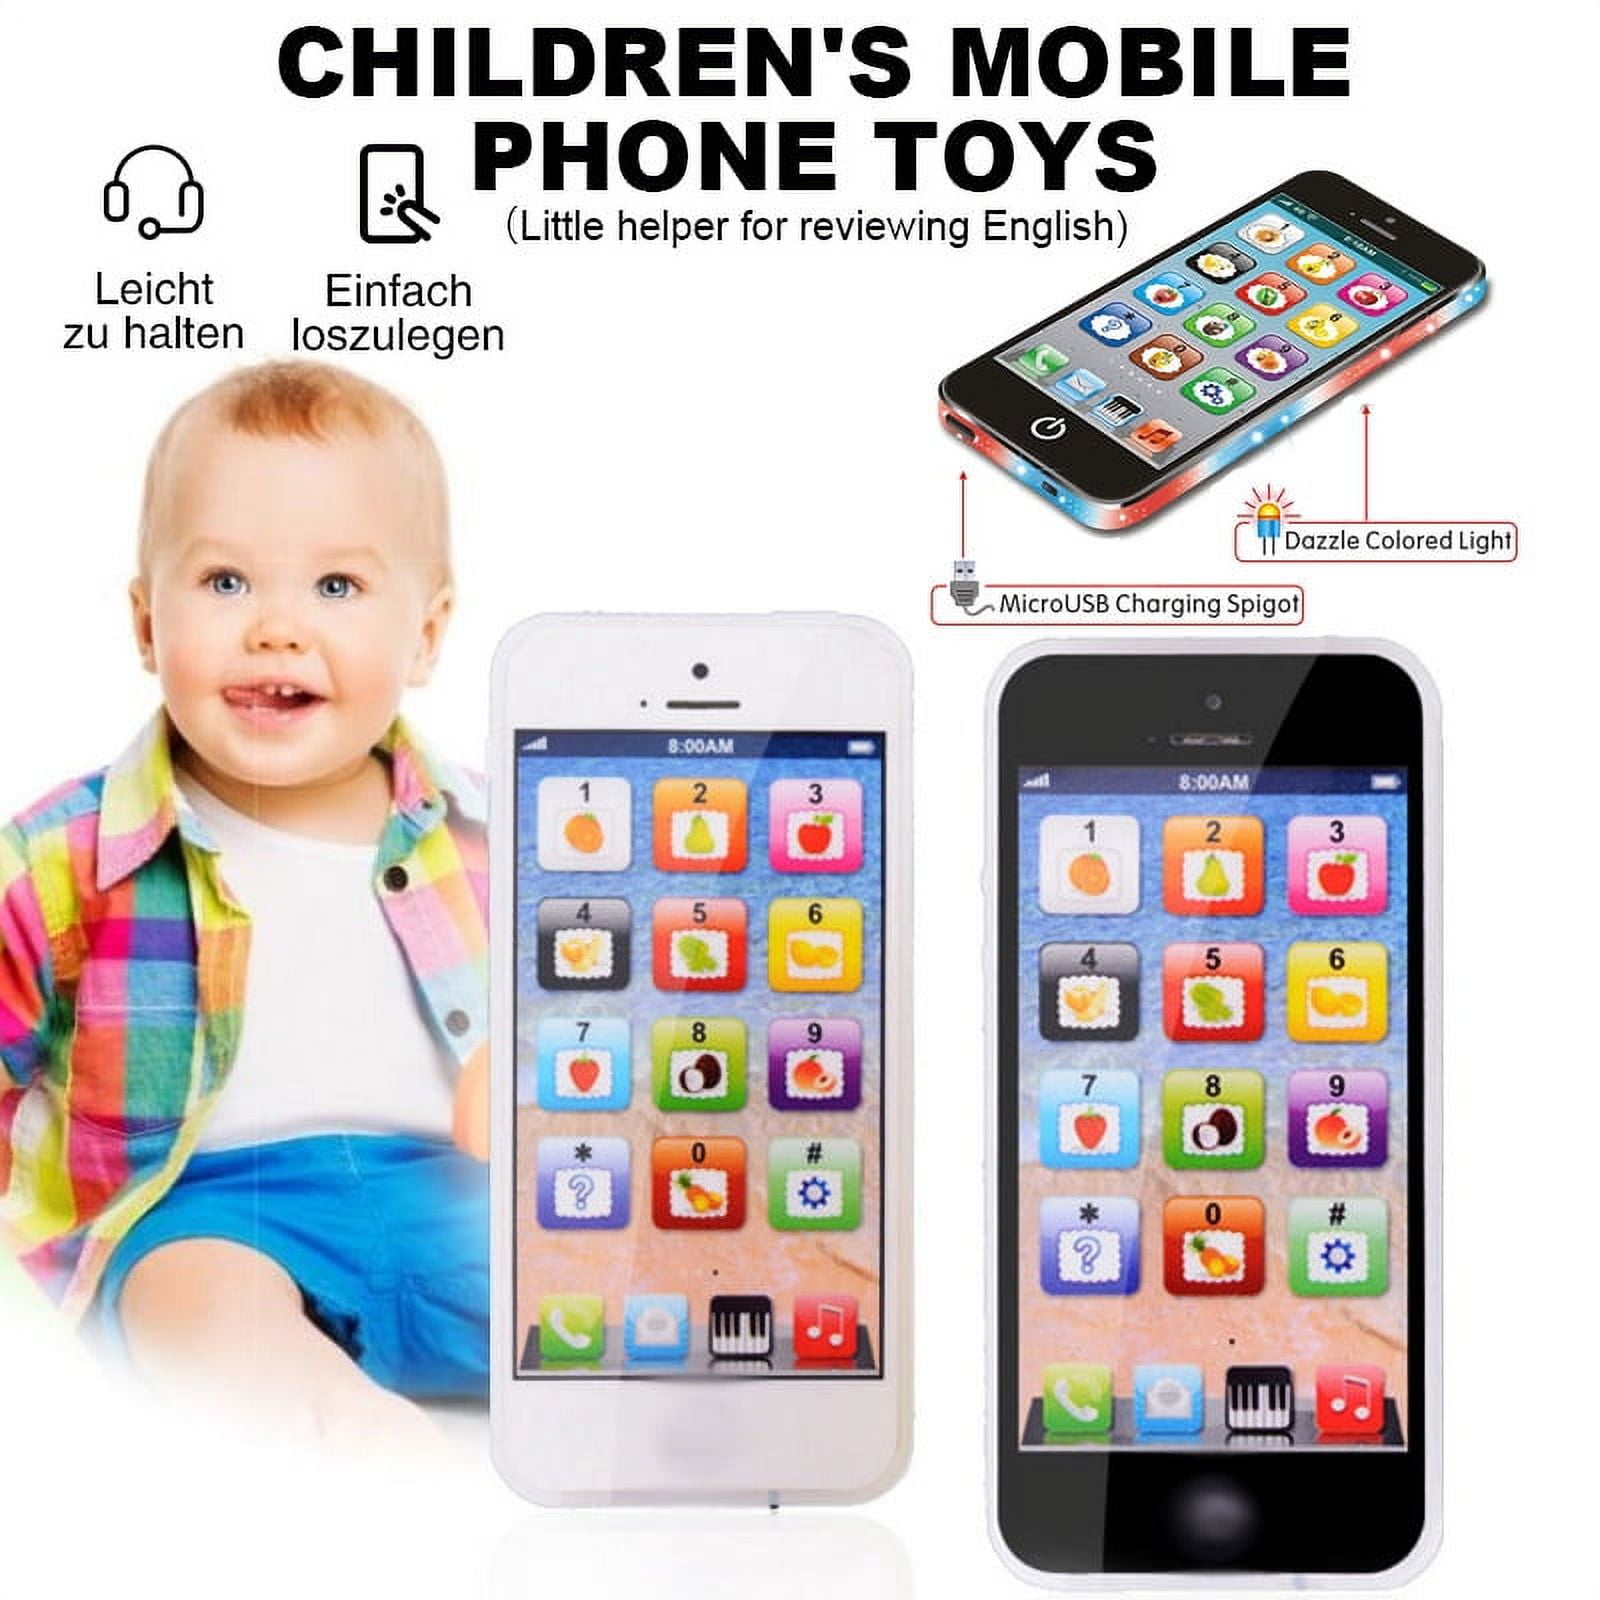 JOYIN Kids Cell Phone, Baby Toy Phone with Music & Remote, Fun